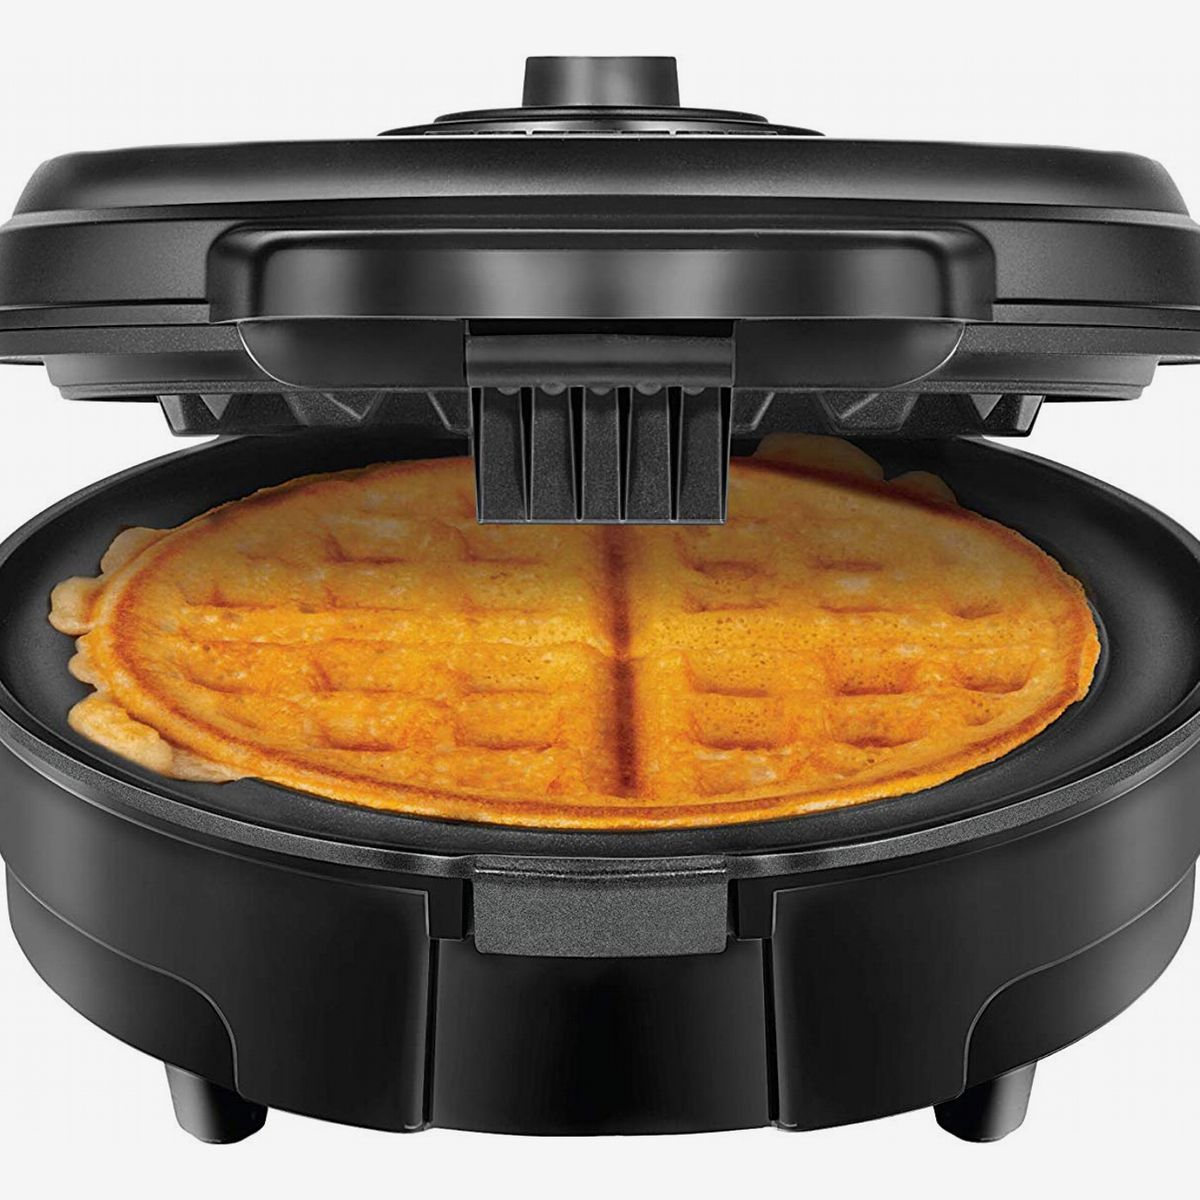 Details about  / Commercial Nonstick 110V 220V Electric Rotated Belgian Waffle Maker Iron Machine